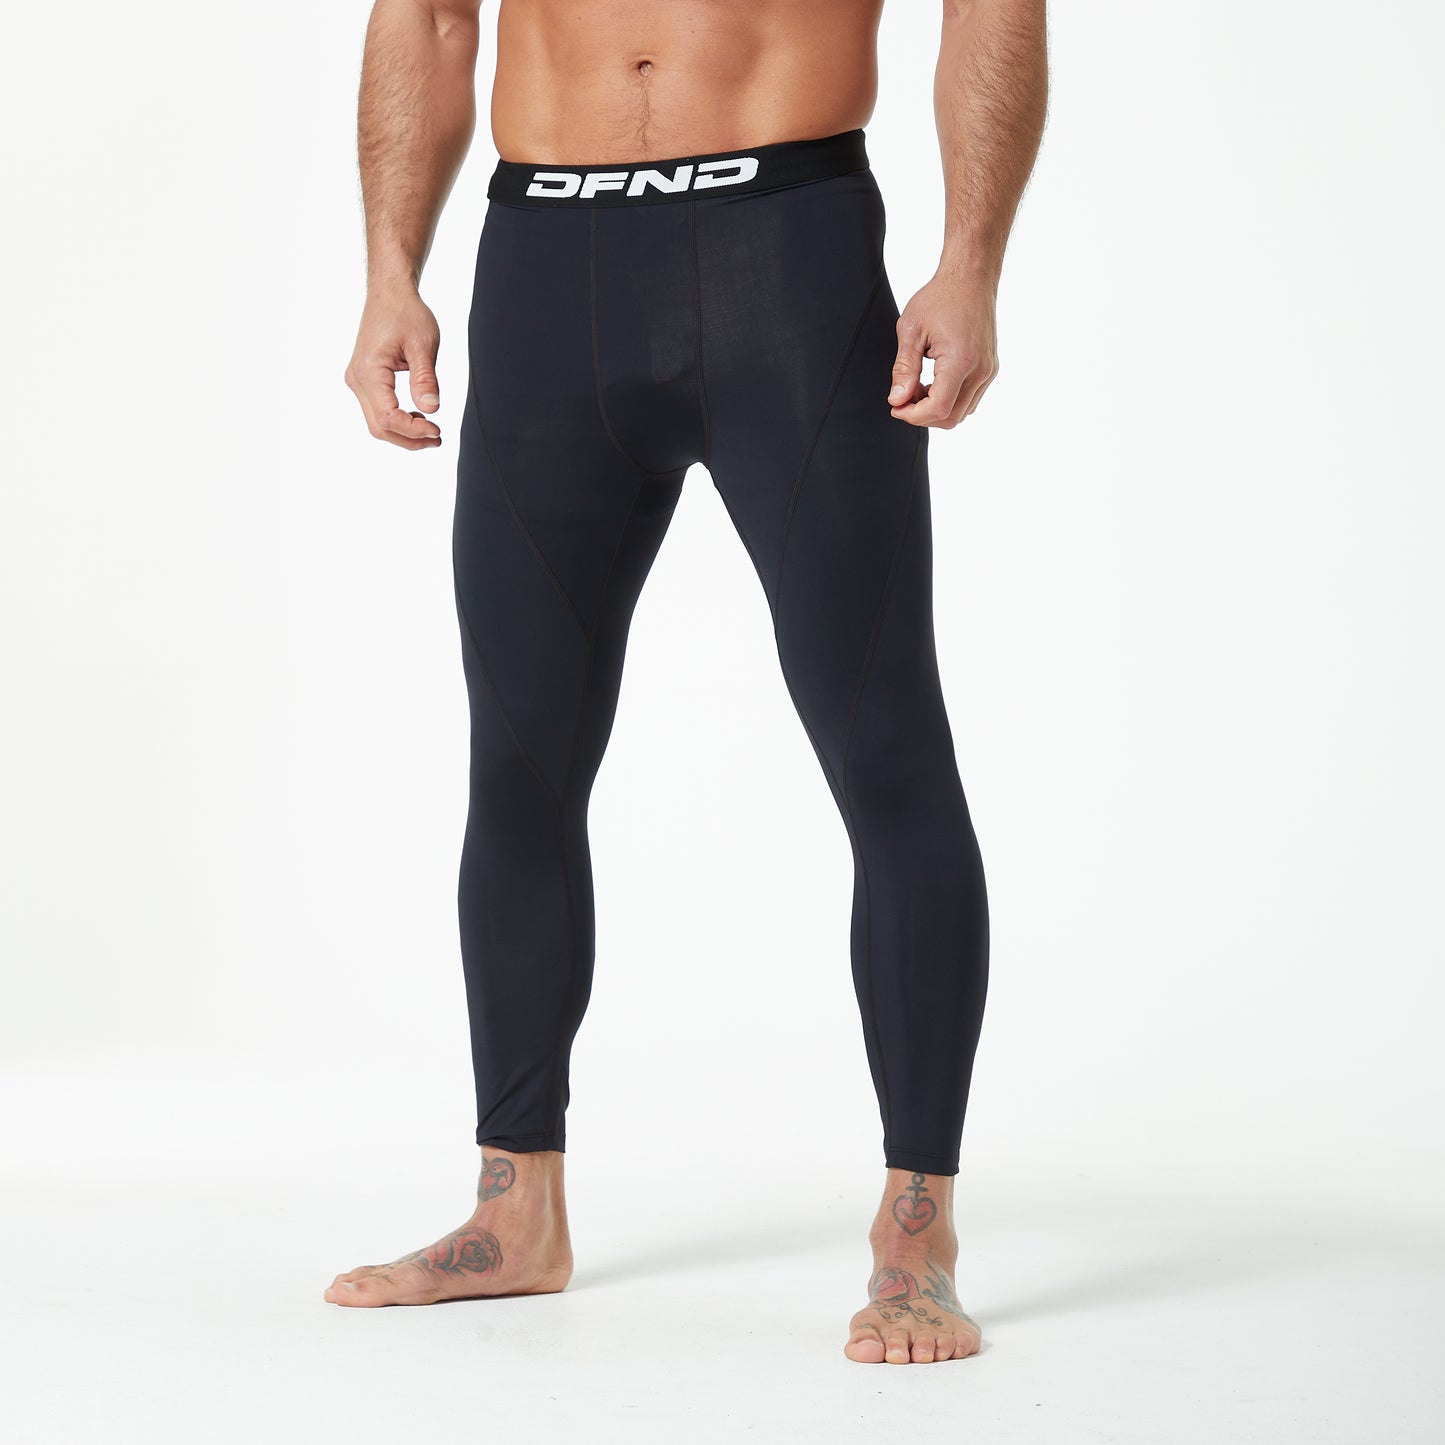 Enhance Your Performance with our Zone Compression Leggings